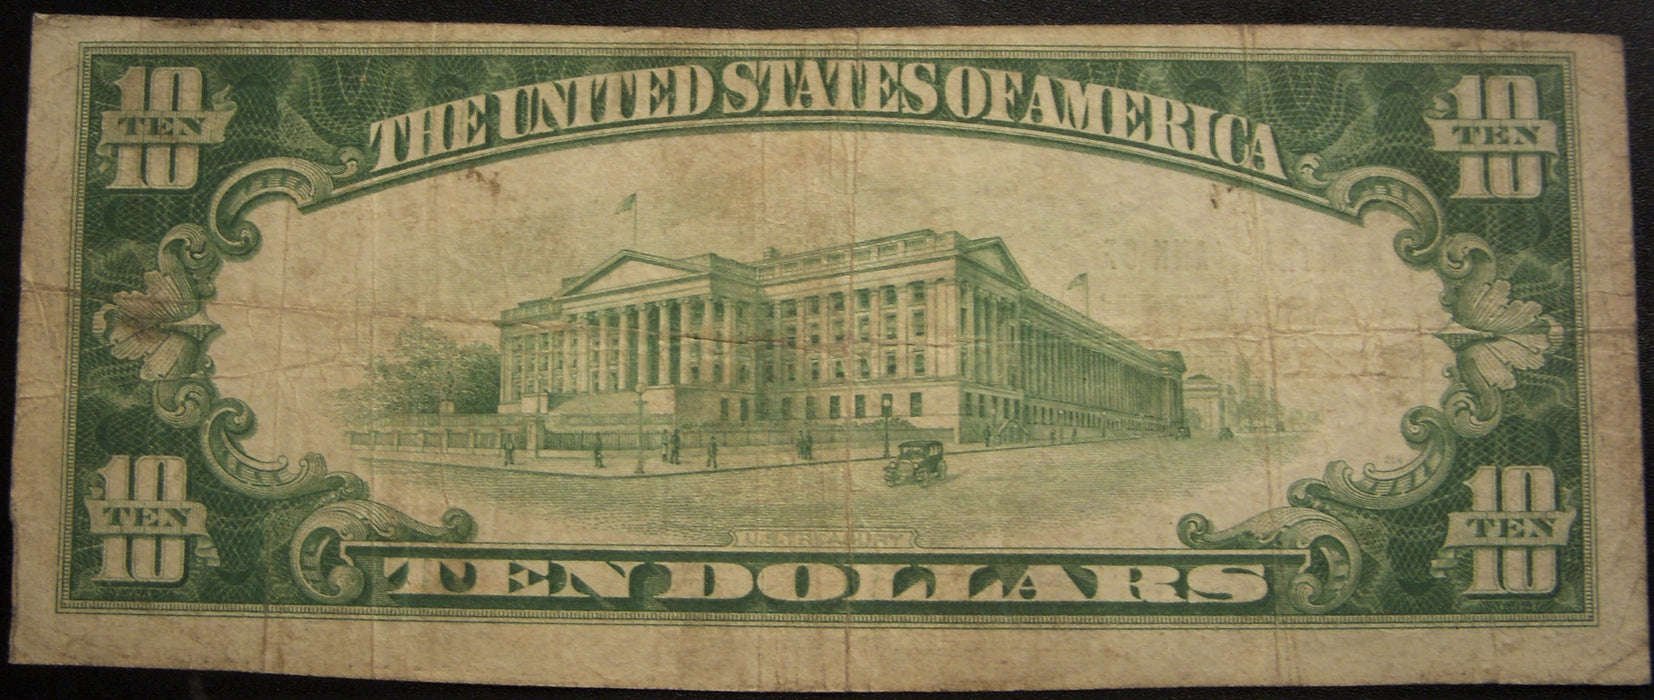 1929 $10 National Bank Note - Boonville, IN Bank# 10613